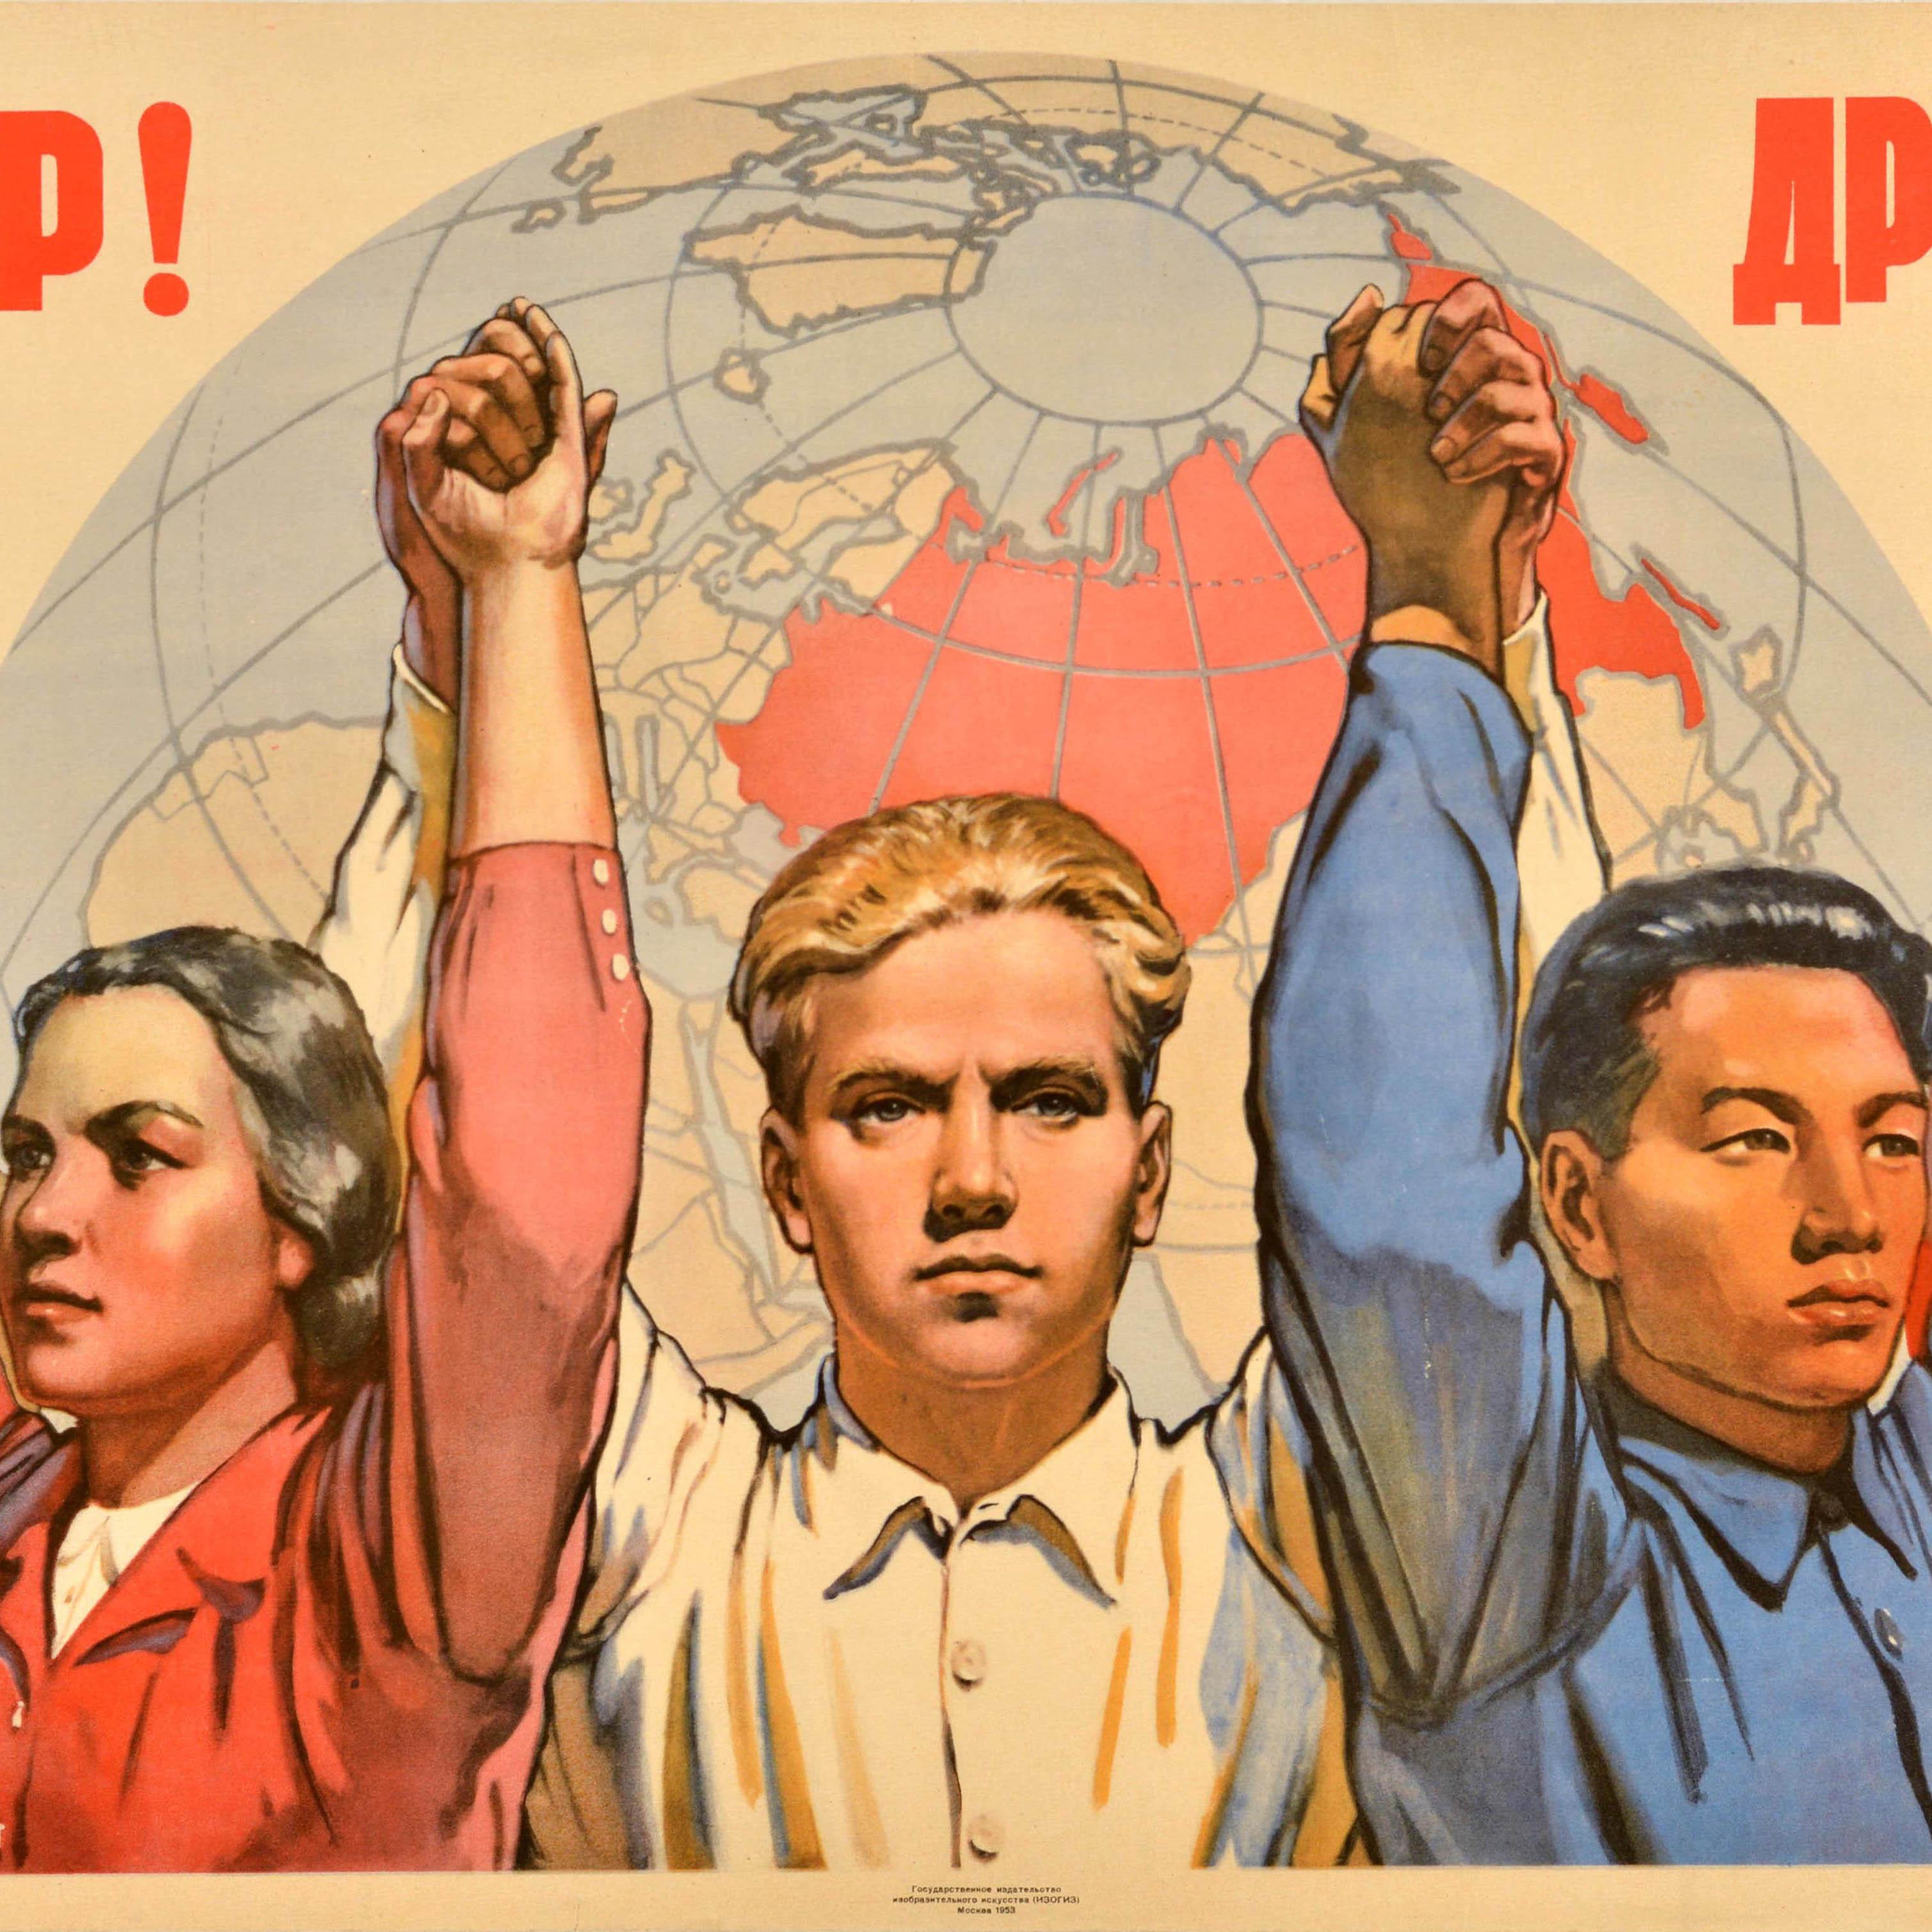 Original vintage Soviet propaganda poster promoting world Peace / Мир and international Friendship / Дружба featuring a great design depicting determined young people from around the world wearing their traditional dress from various countries,